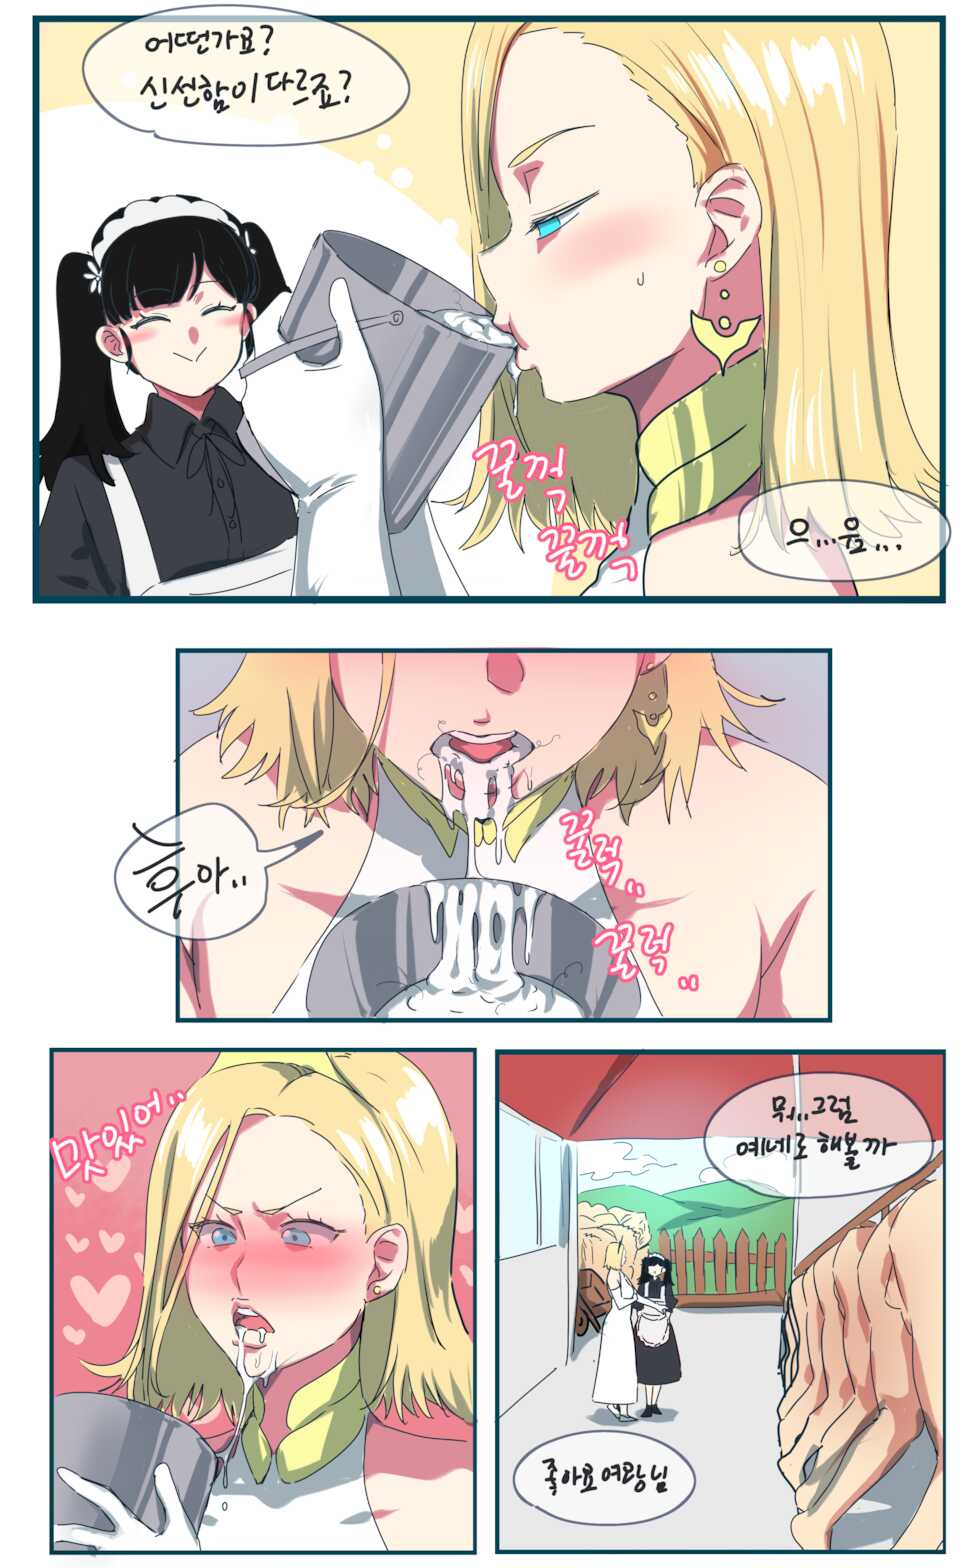 [Ooyun] Maid [Korean] [Decensored] [Ongoing] - Page 3